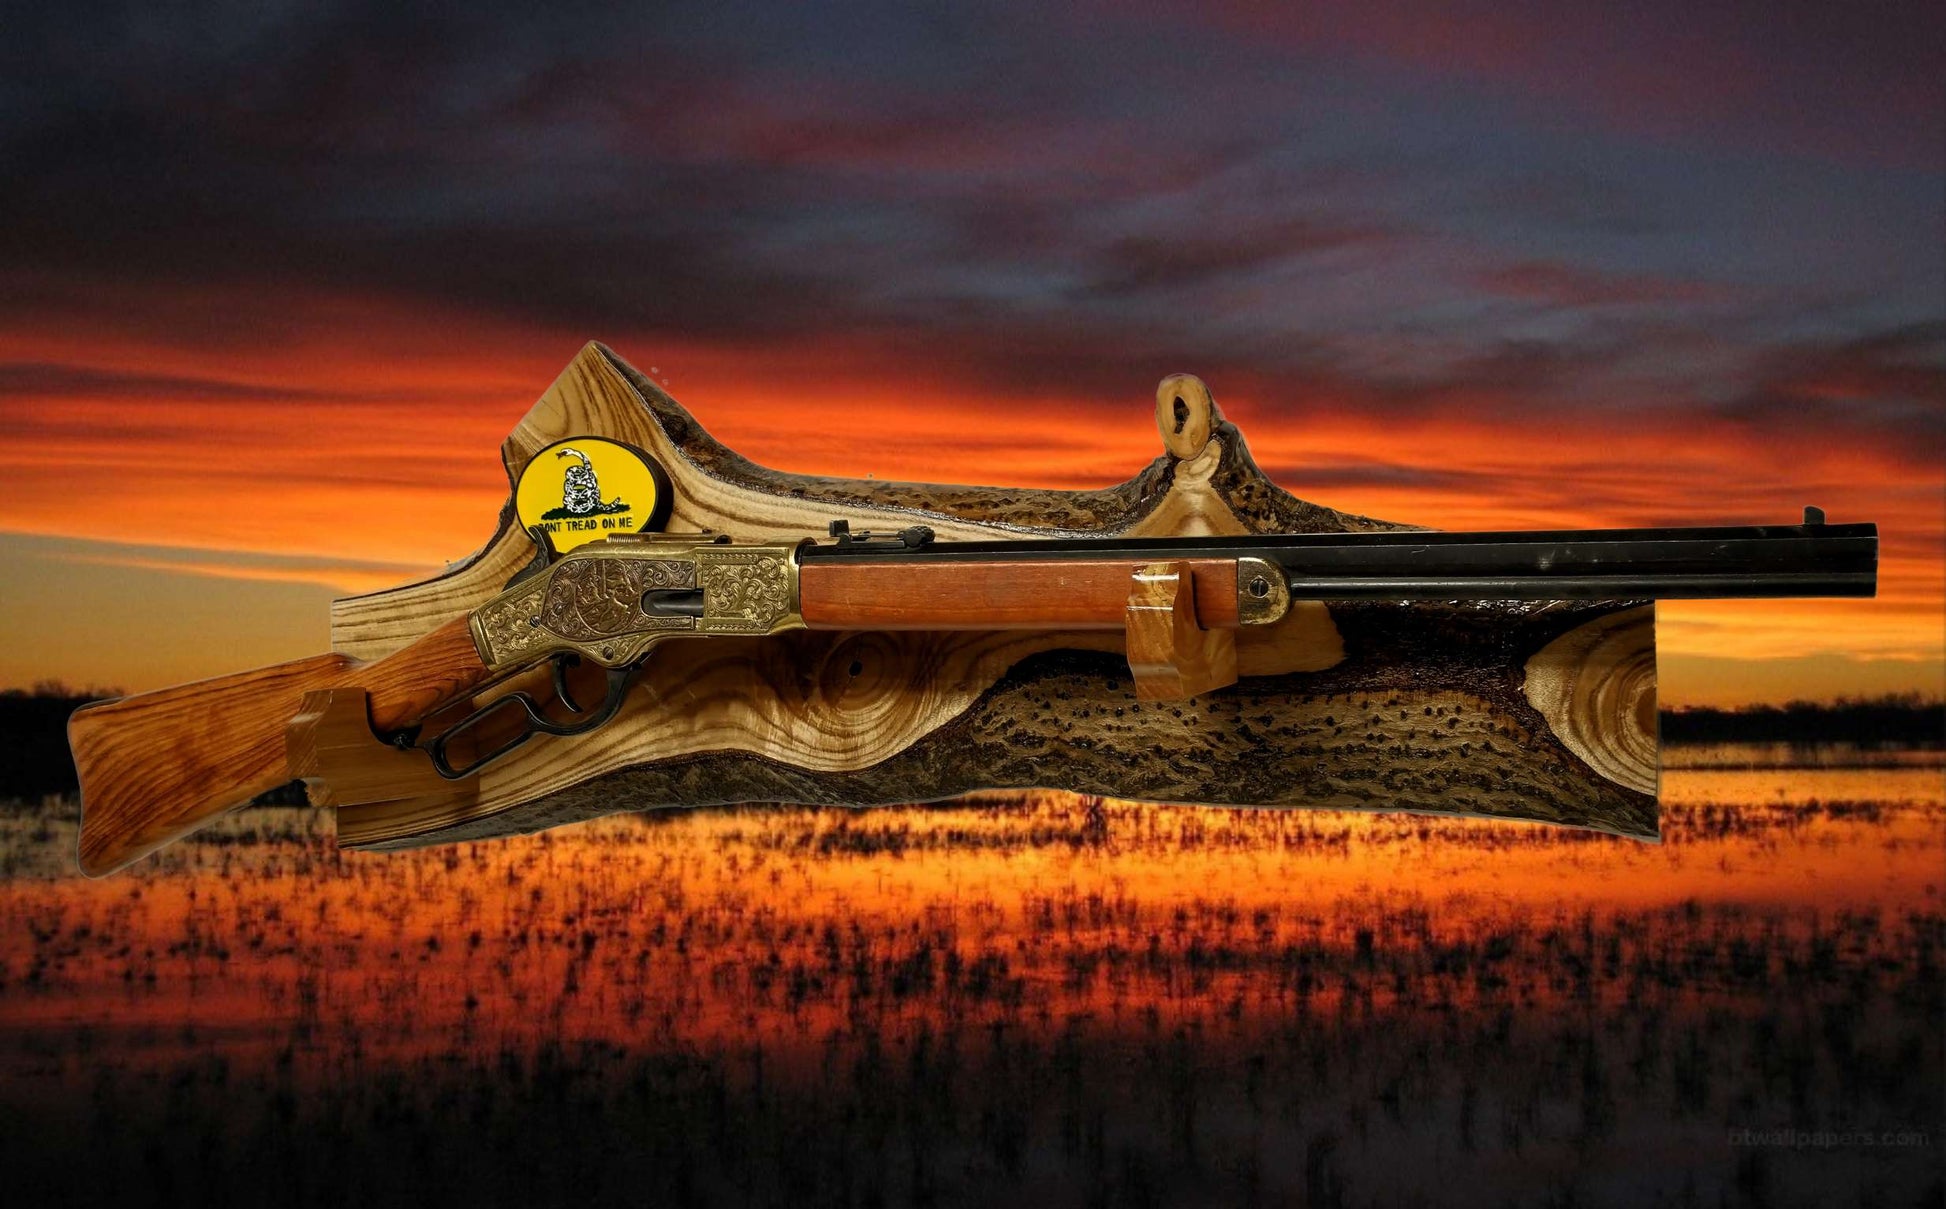 Walker Wood Gifts Gun Display Rustic Don't Tread On Me Contoured Live Edge Lever Action Gun Display Western Gift